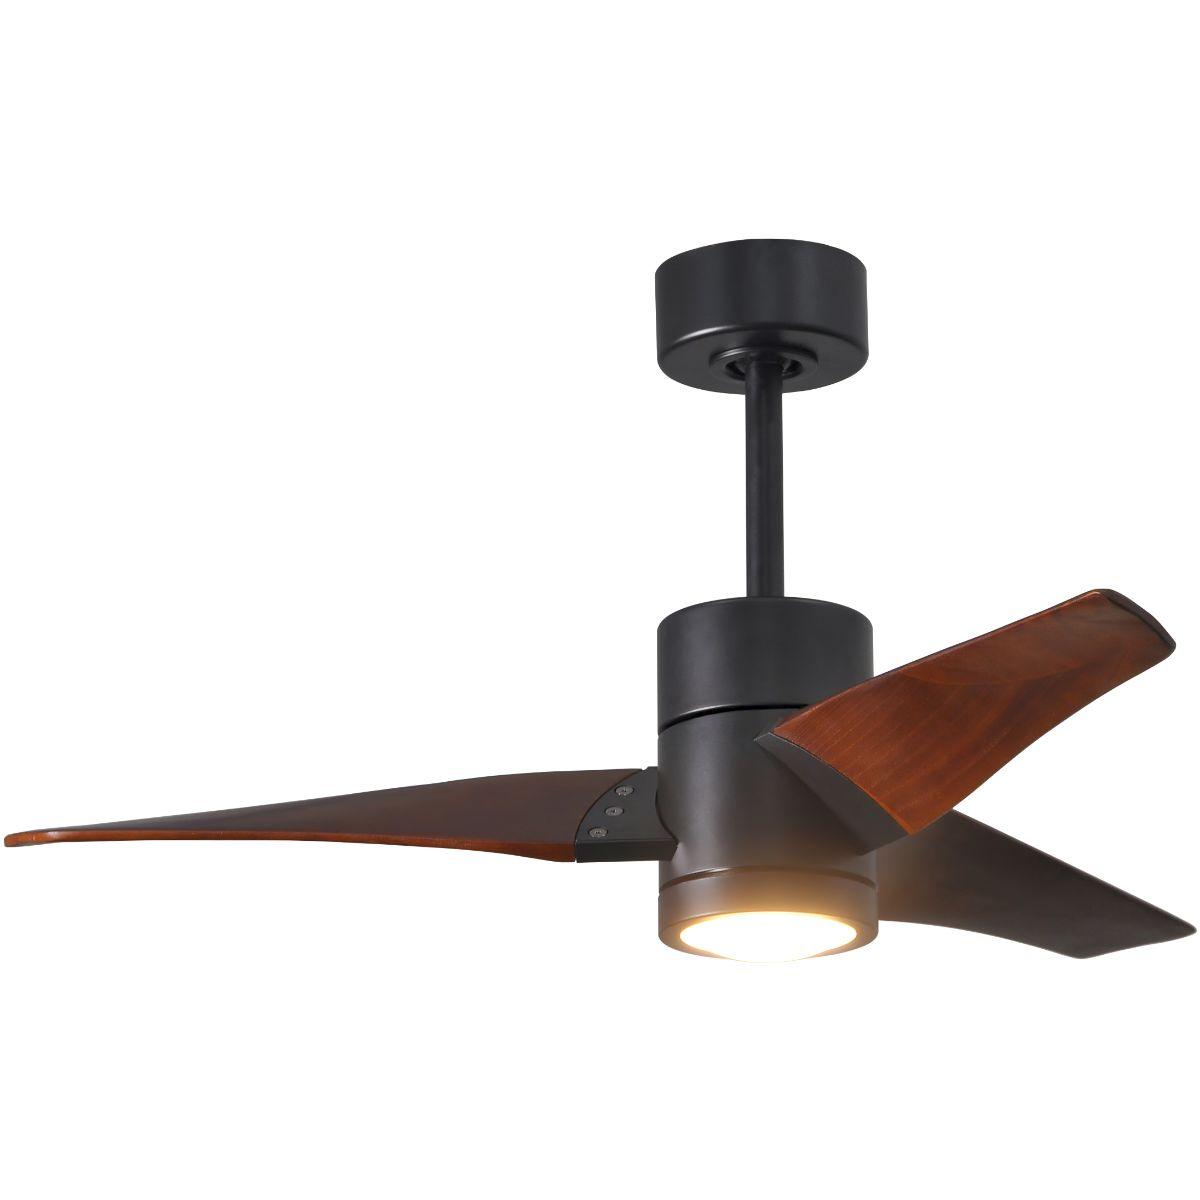 Super Janet 42 Inch Outdoor Ceiling Fan With Light, Wall And Remote Control Included - Bees Lighting